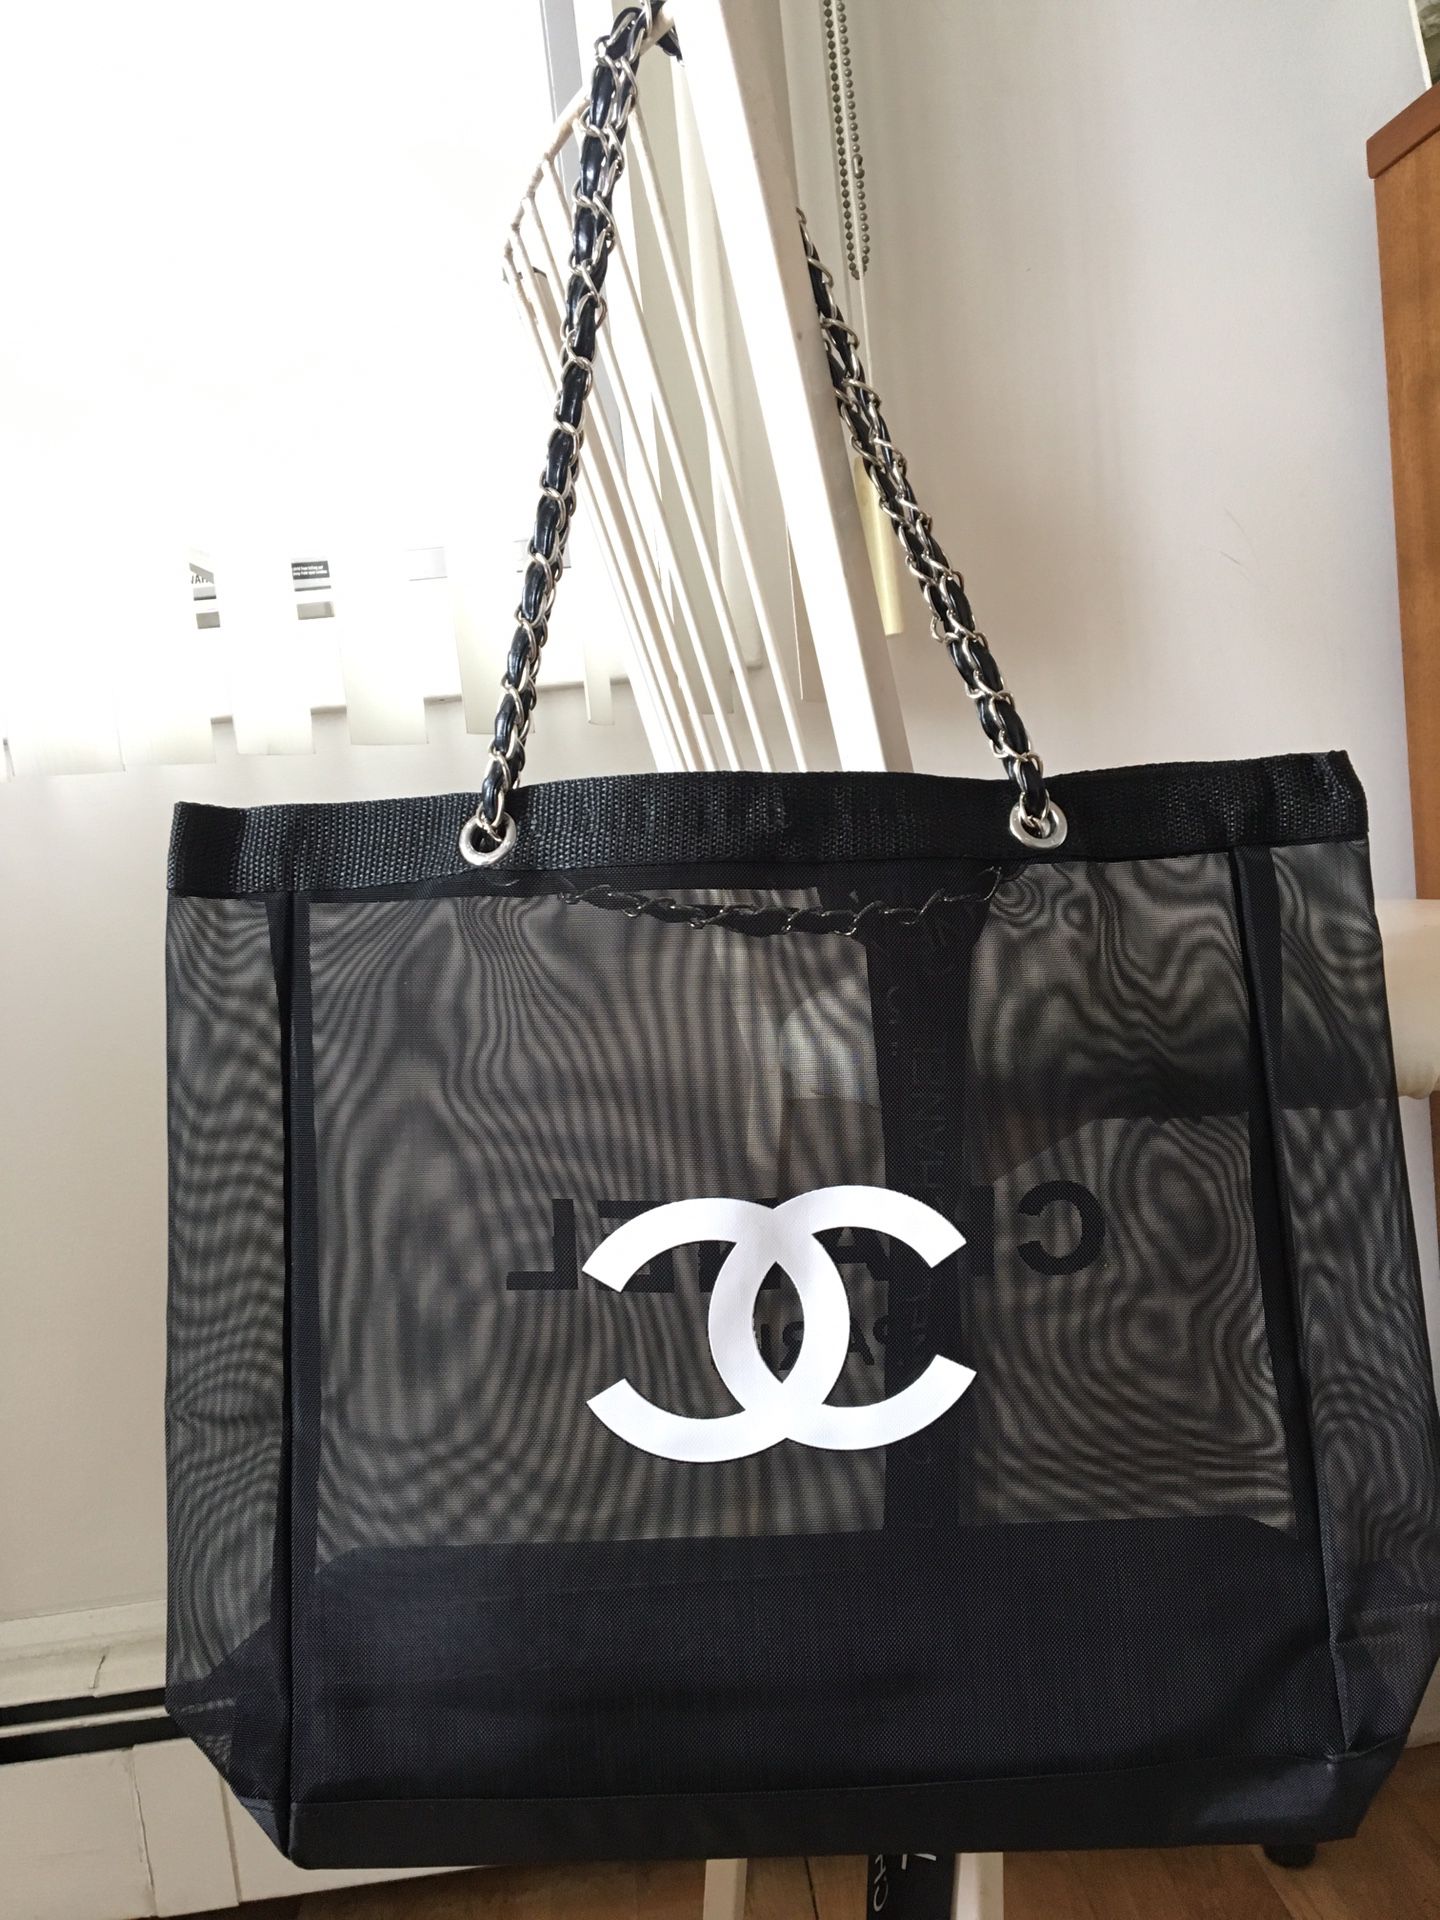 brand new chanel tote bag